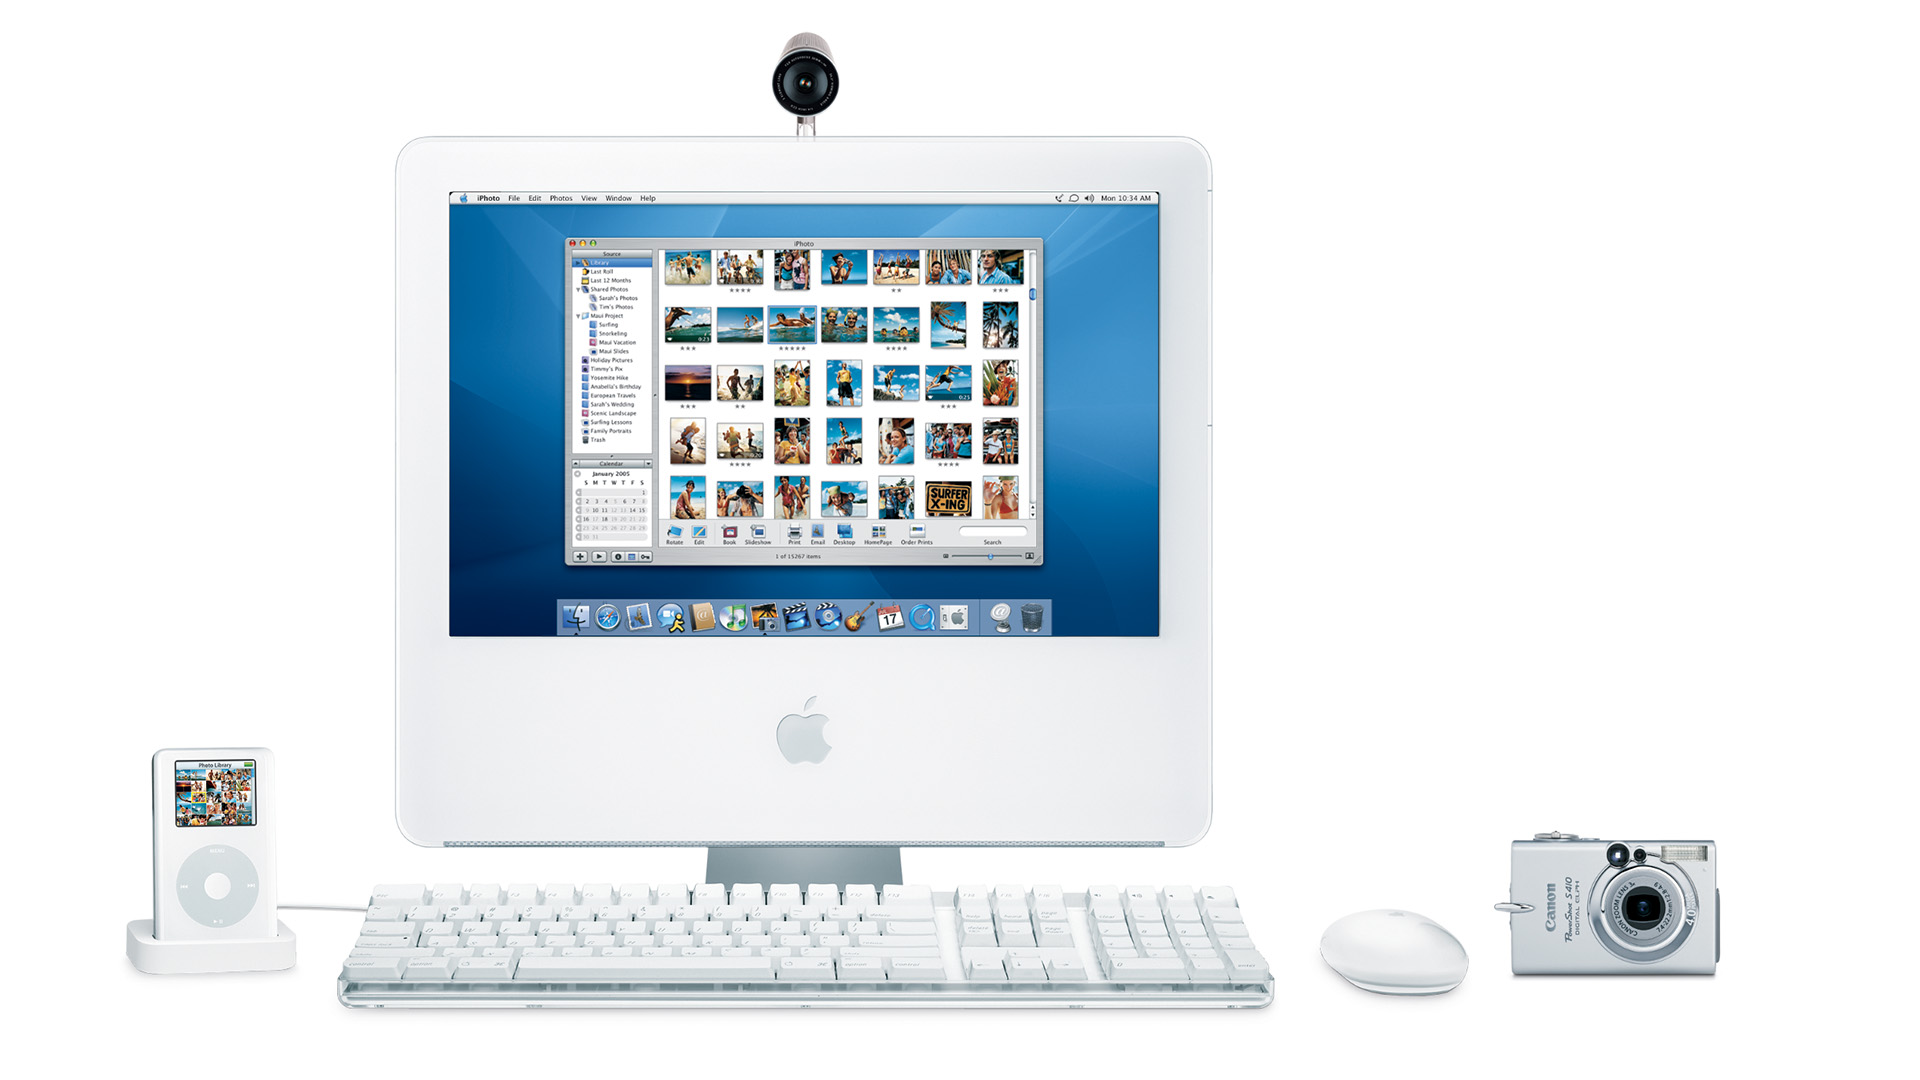 20 years of iMac: A story of relentless design iteration - 9to5Mac